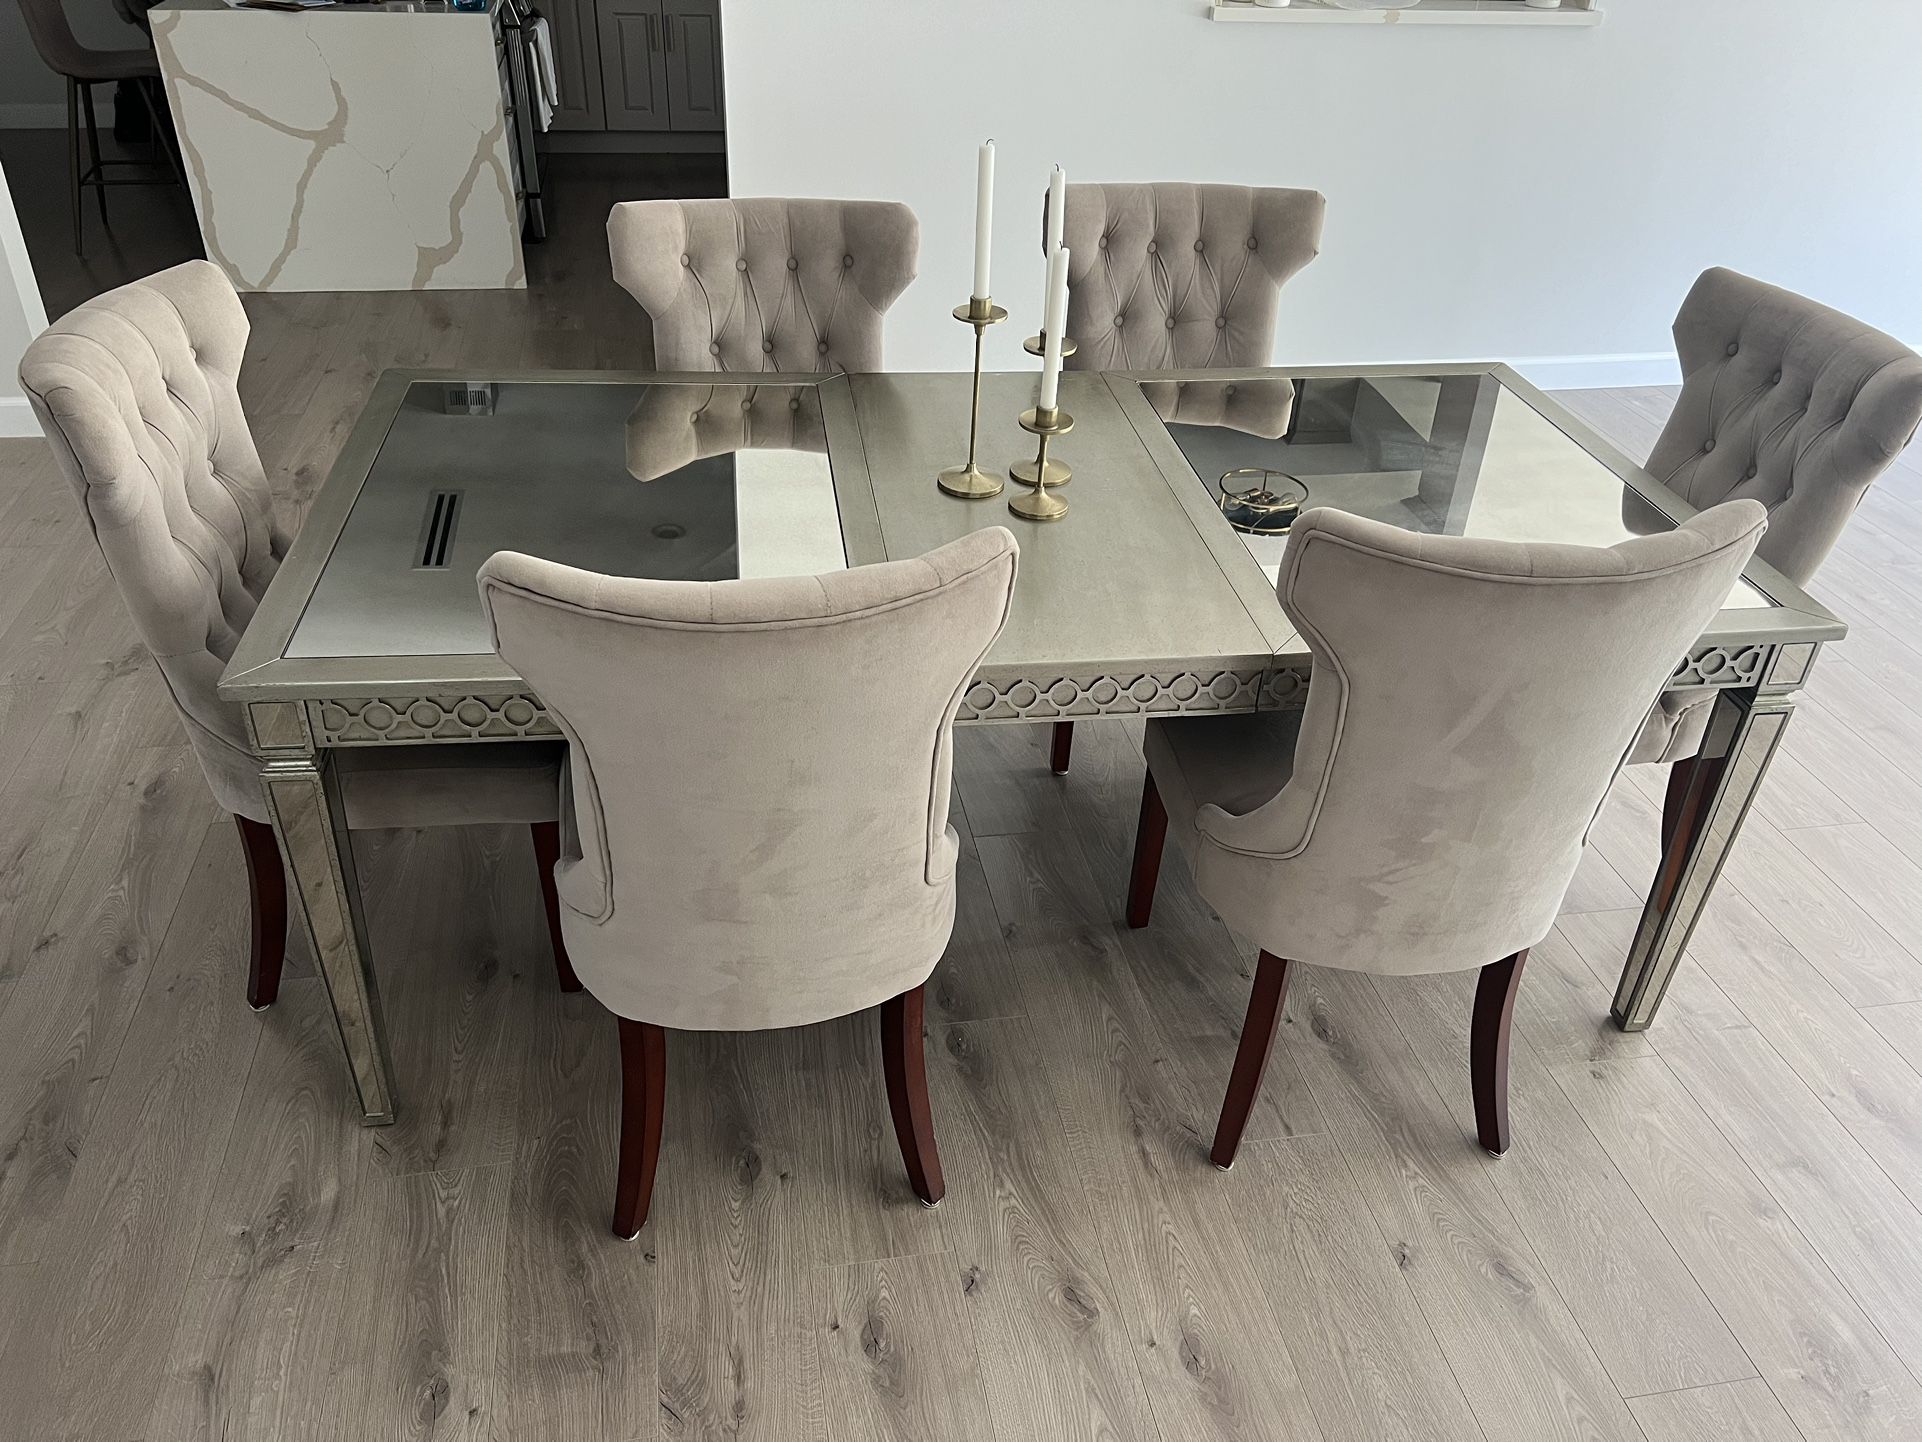 Z Gallerie dining table With 6 Upholstered Chairs